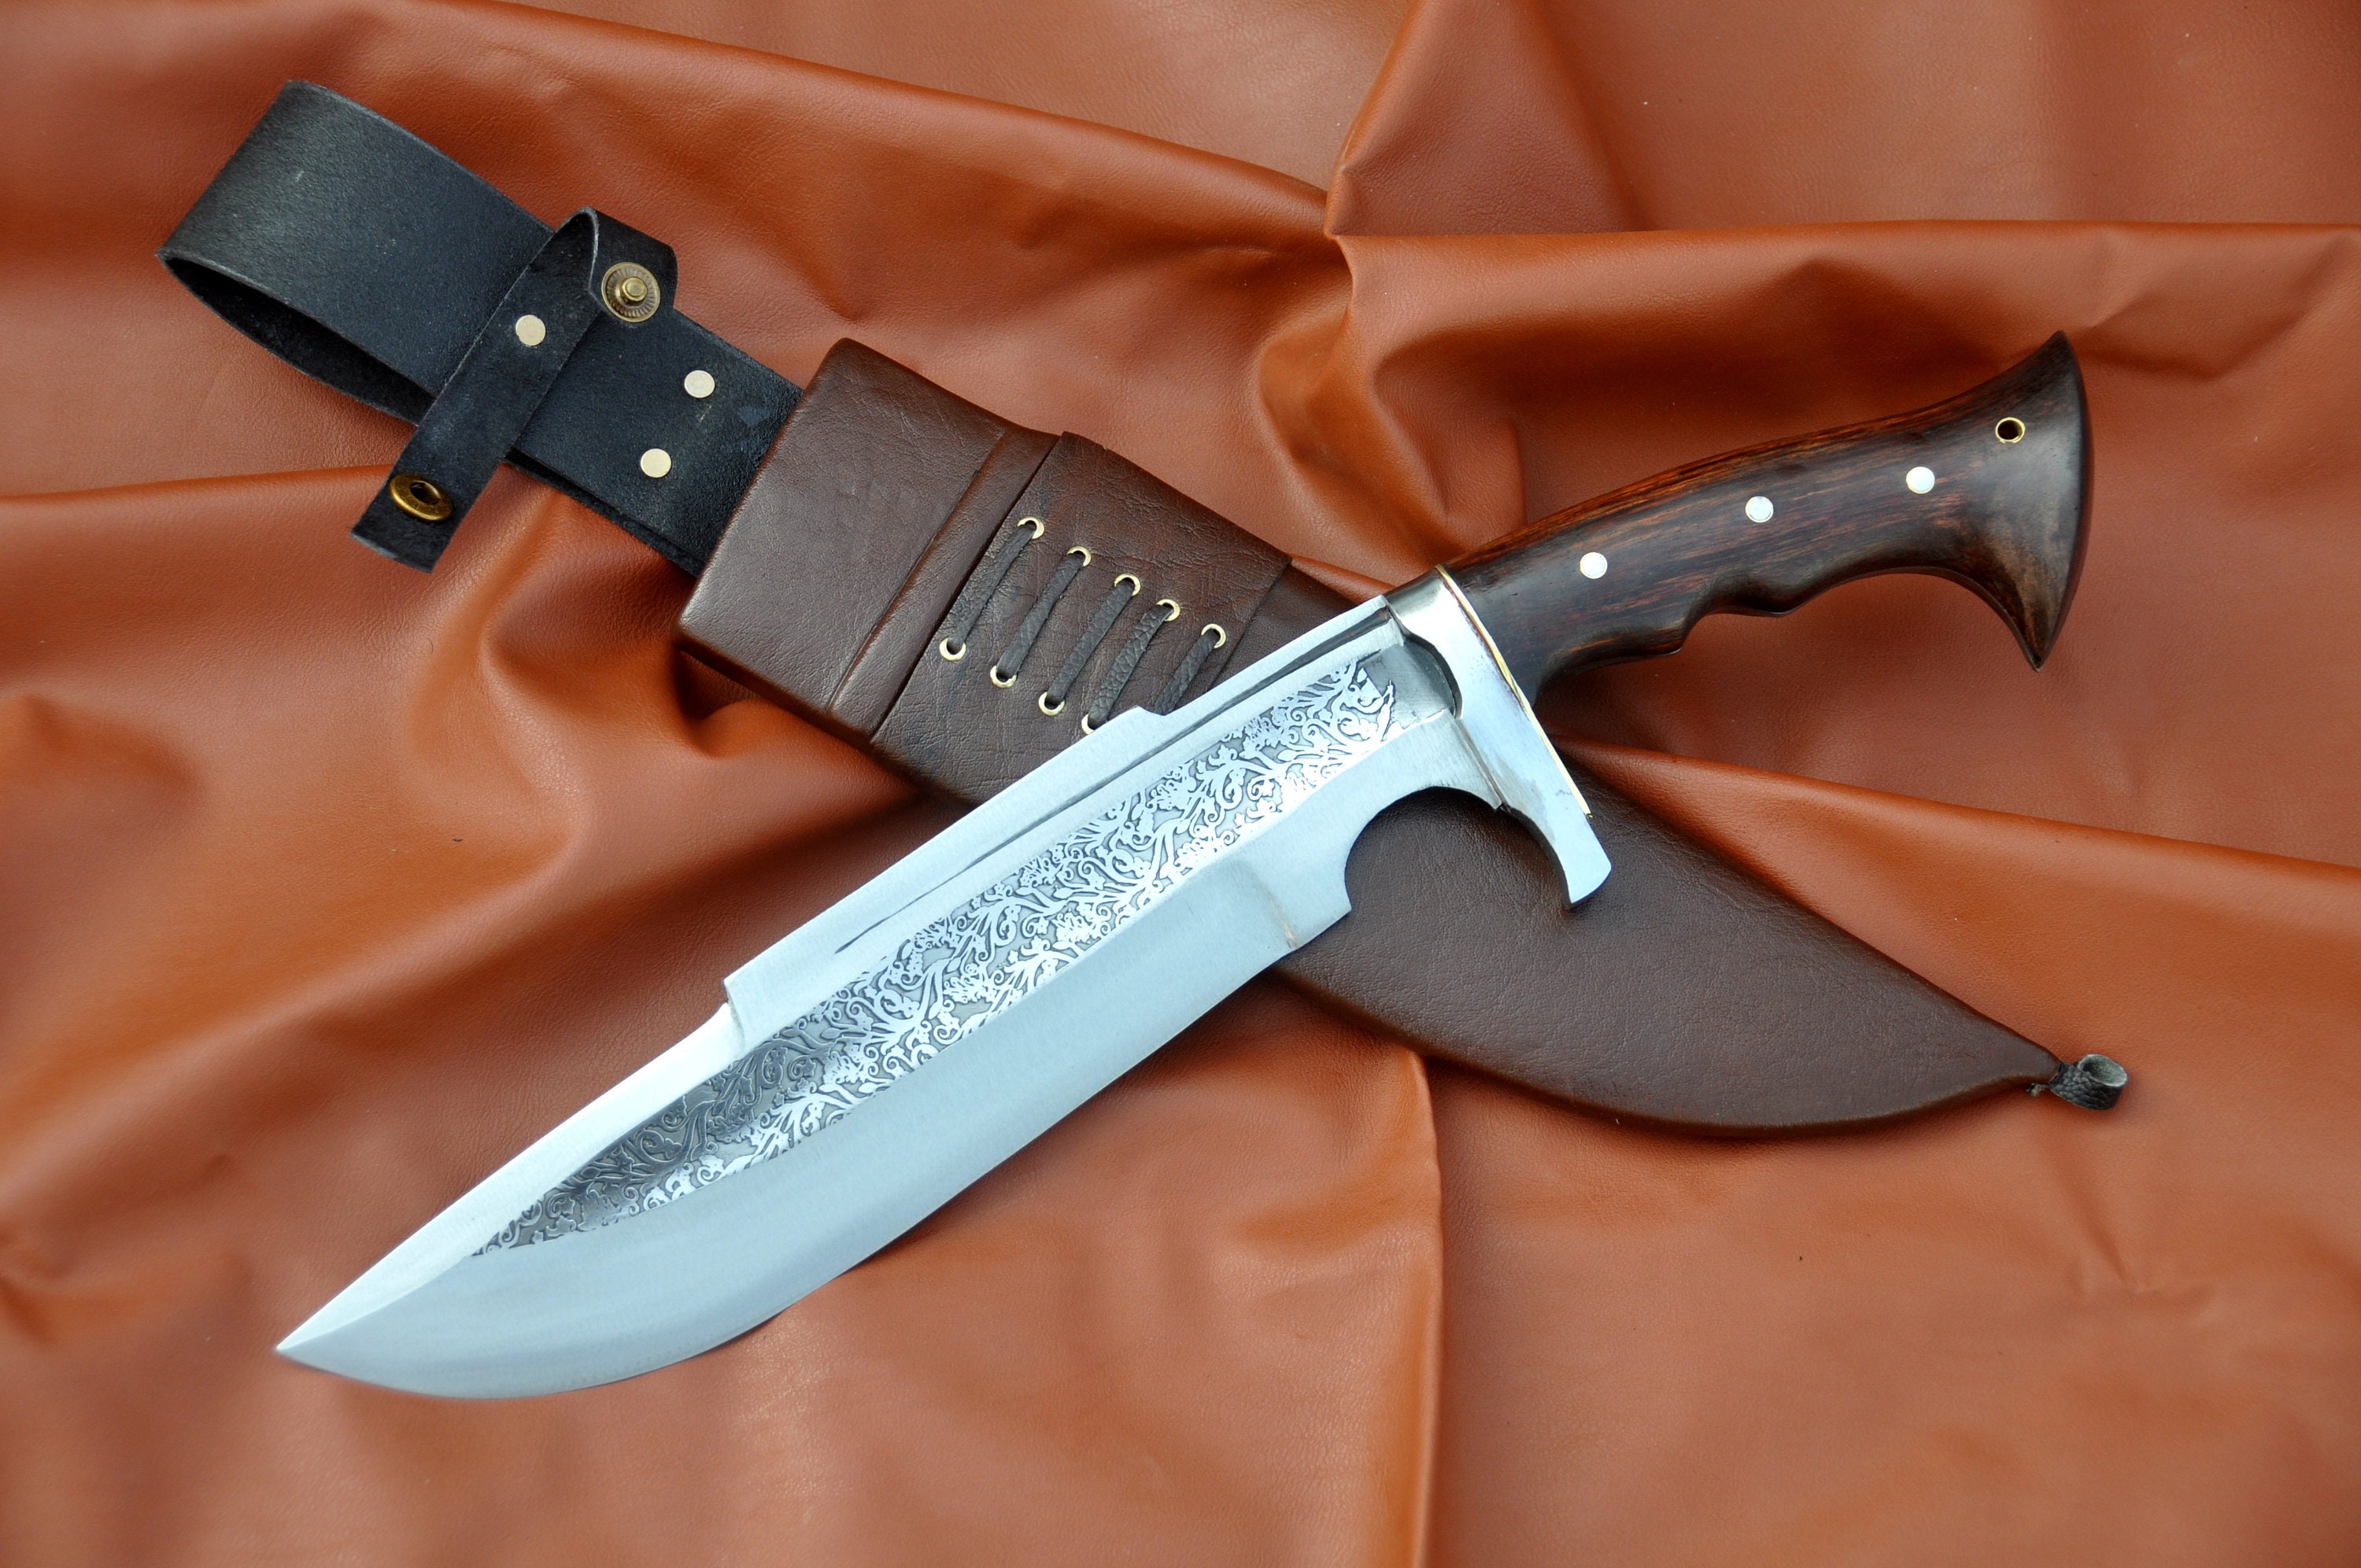 12 Inches Long Blade Large Bowie Knife-hand Forged Bowie Knife-tempered-sharpen-leaf  Spring of Truck-flower Pattern Etched-scabbard Included 